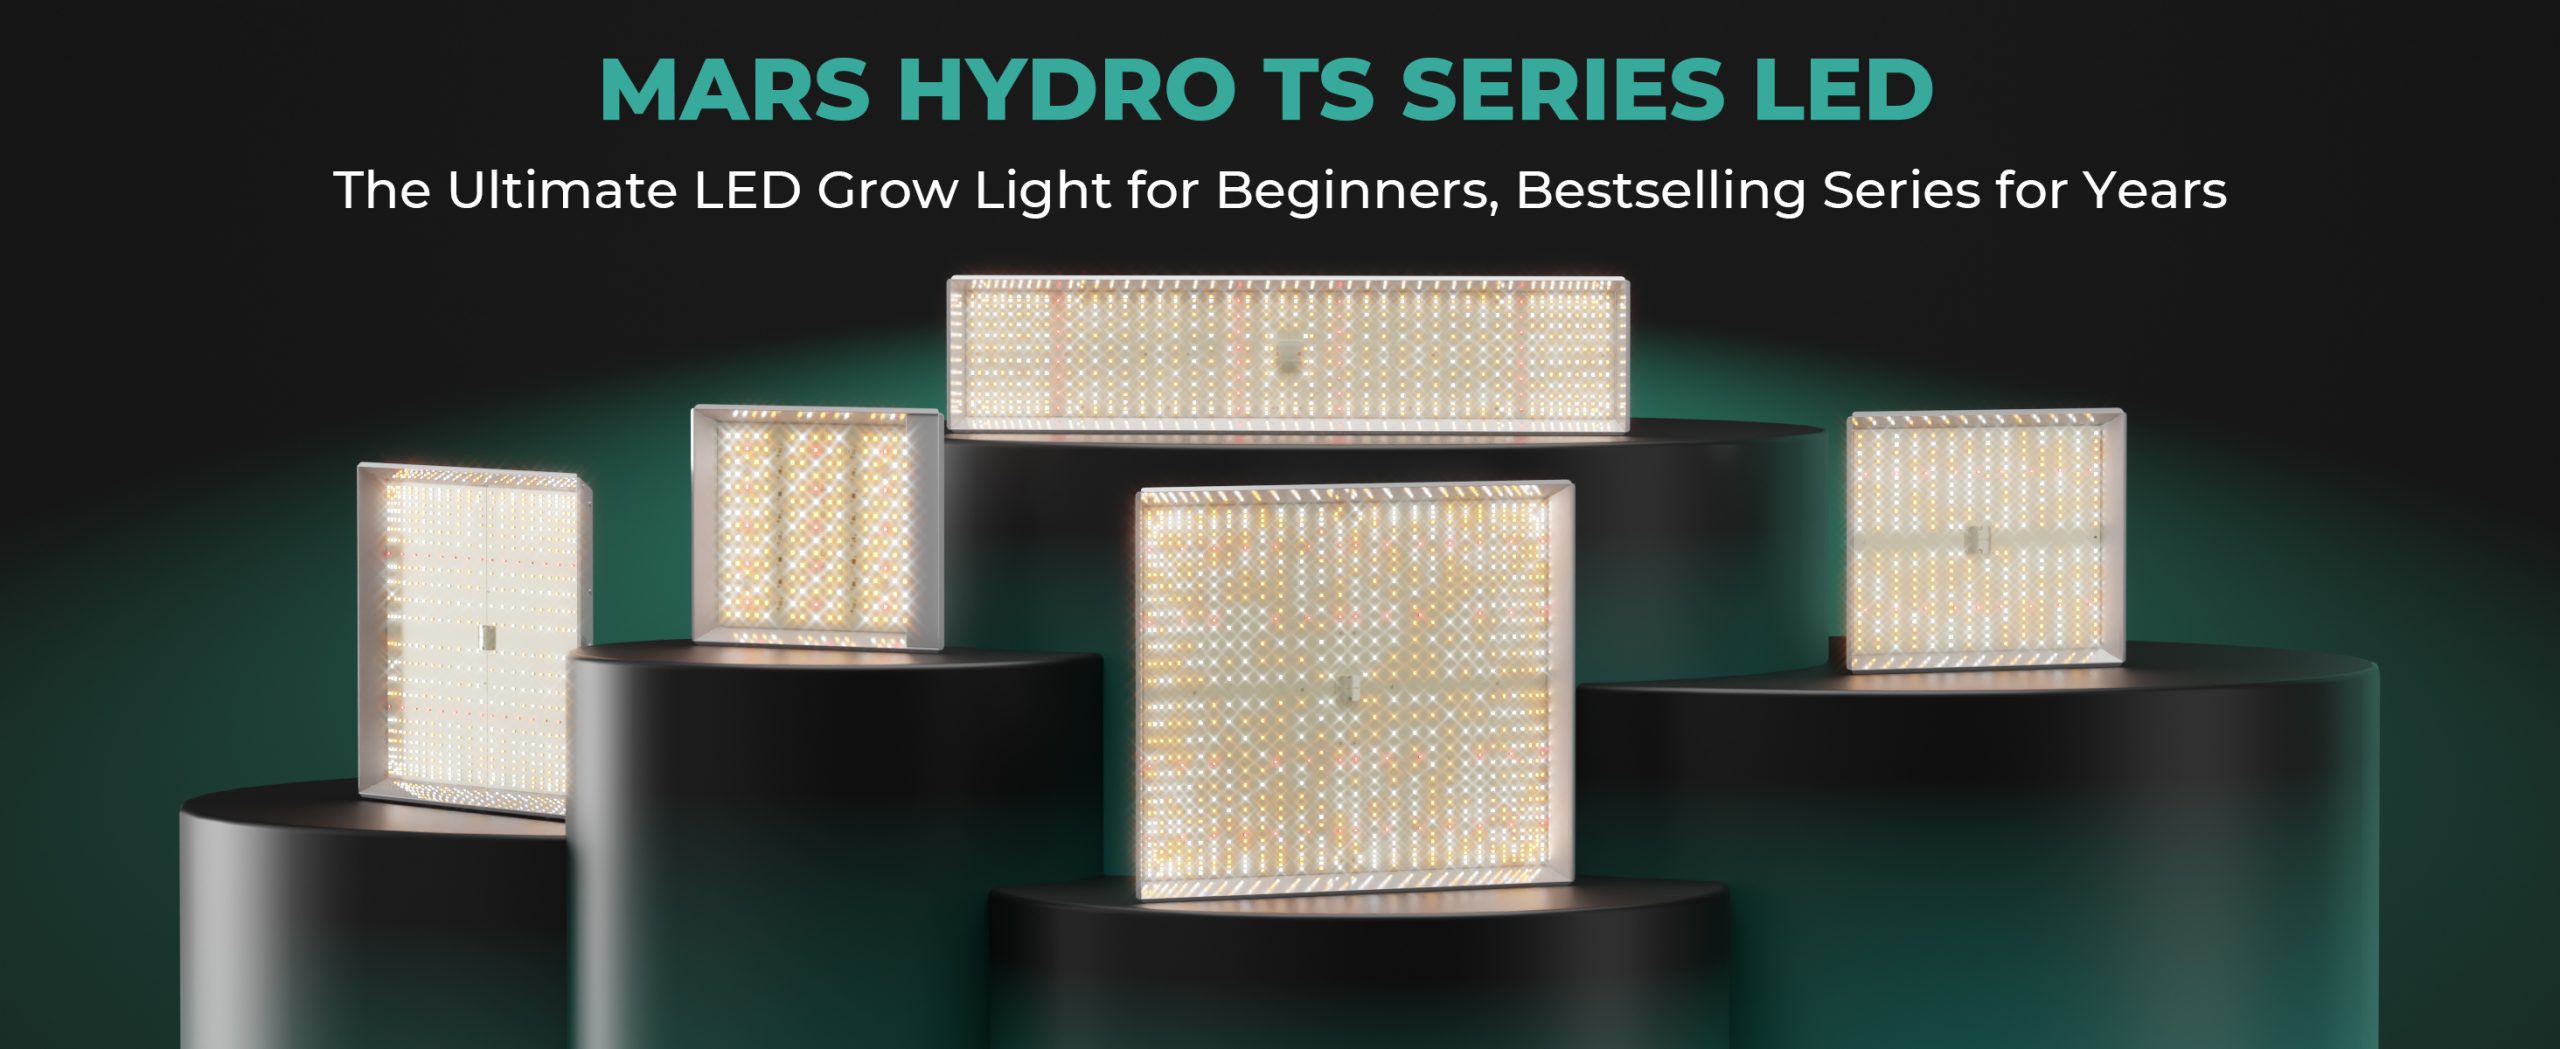 MARS-HYDRO-TS-SERIES-LED-The-Ultimate-LED-Grow-Light-for-Beginners-Bestselling-Series-for-Years-scaled.jpg